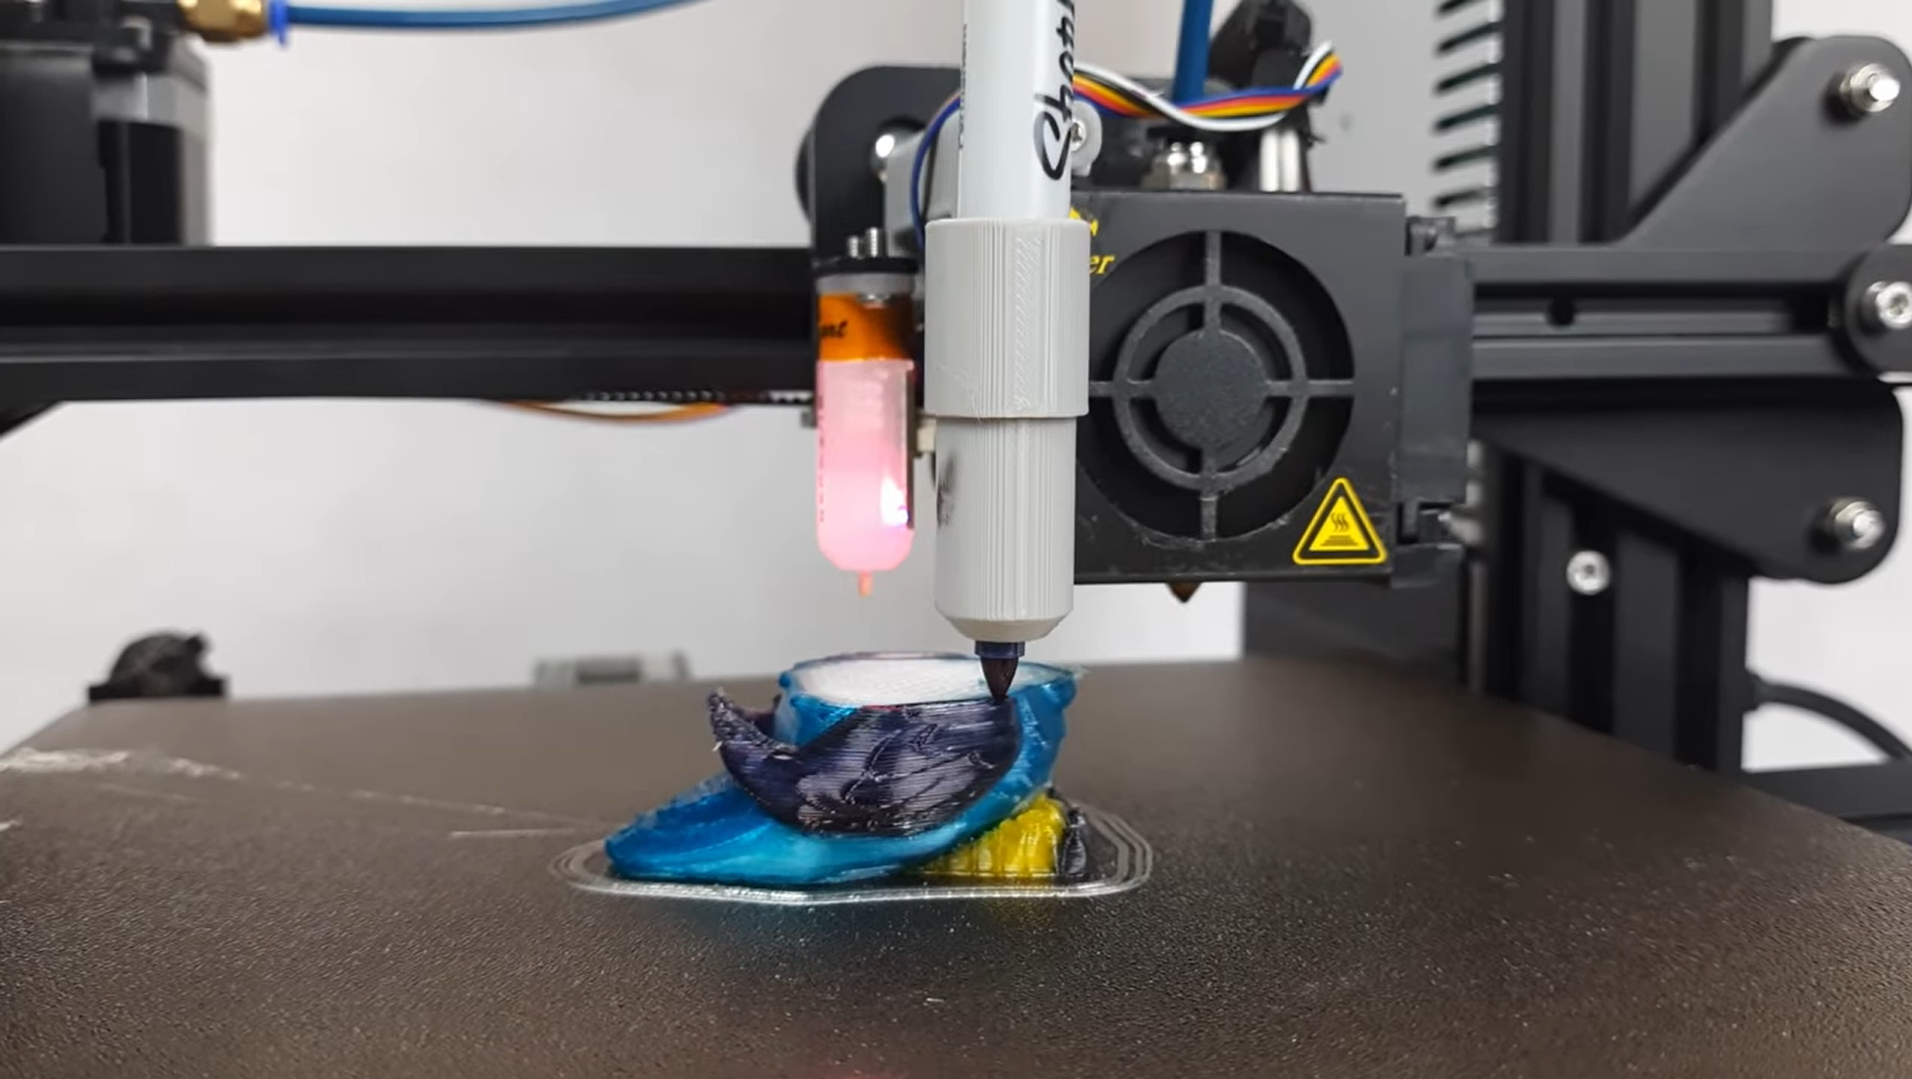 This opensource multicolor 3D printing addon can be built for less